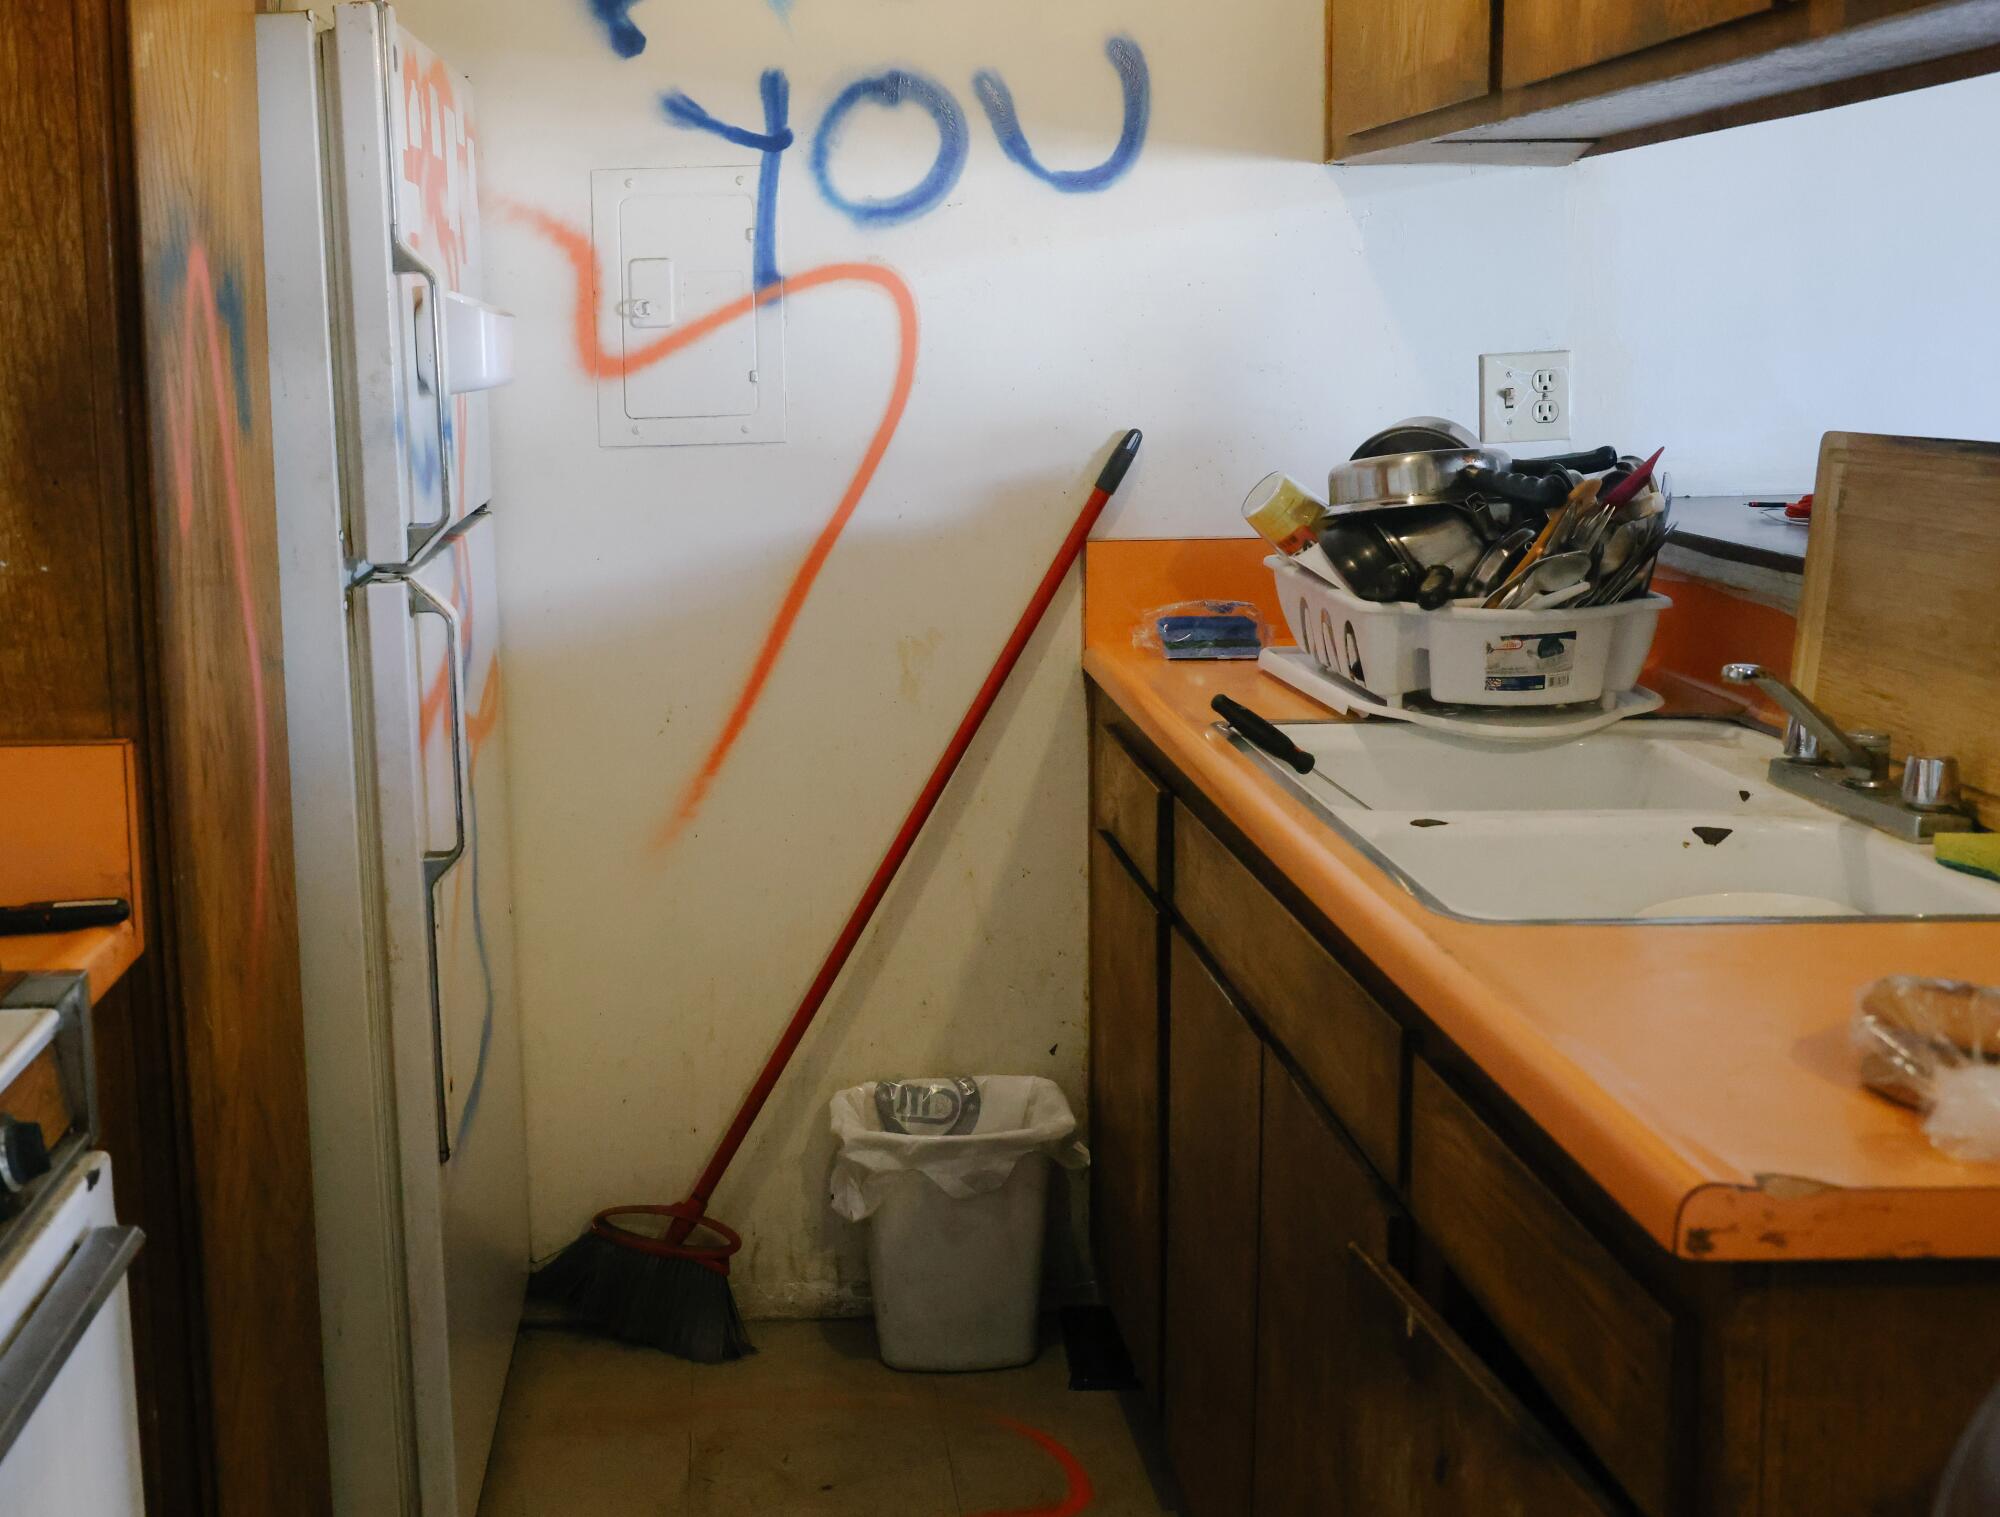 A kitchen spray-painted with graffiti in orange and blue